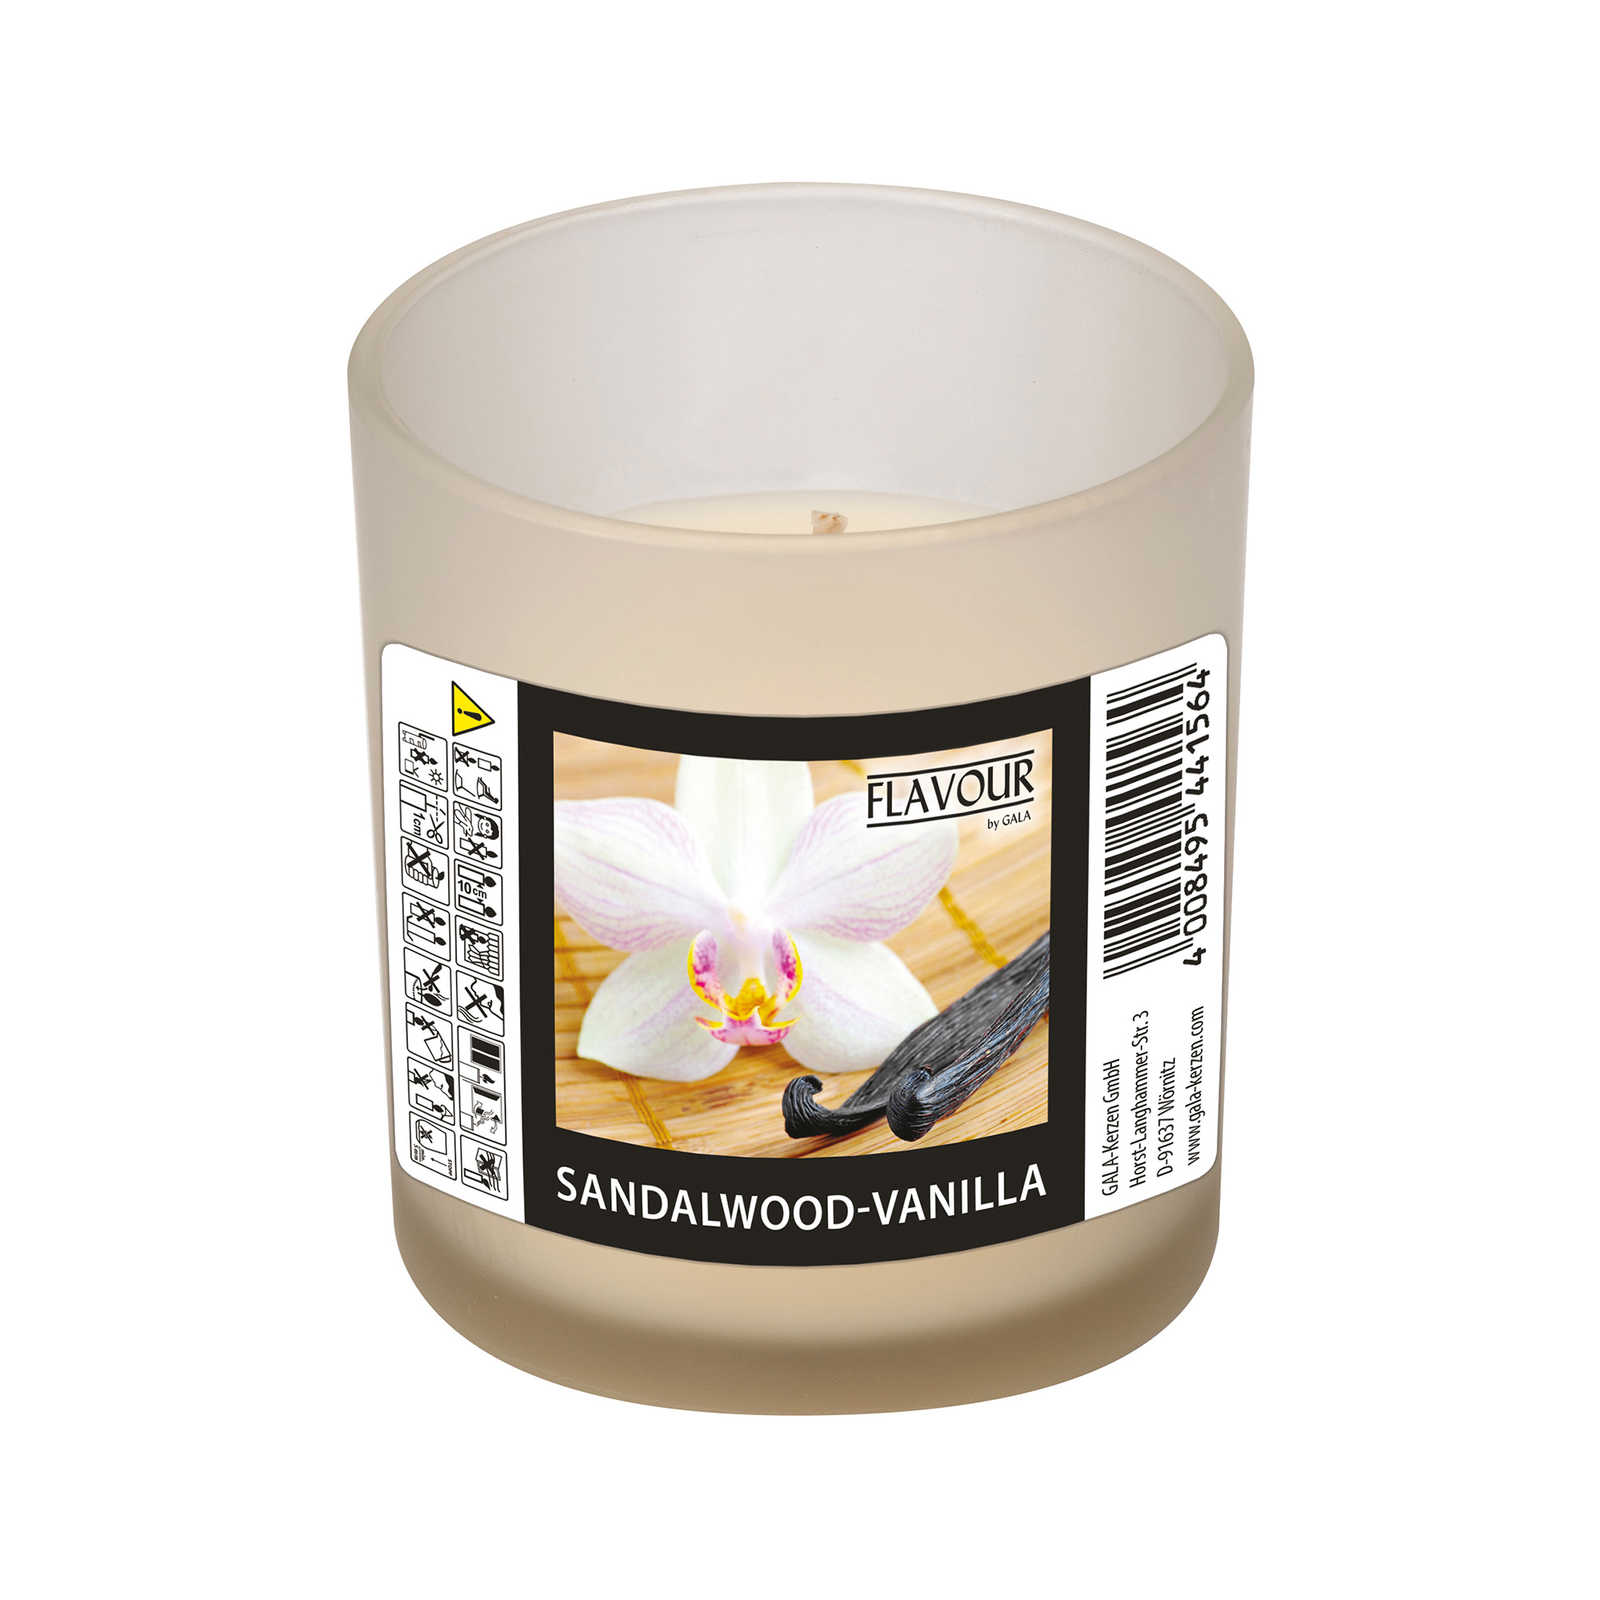         Sandalwood and Vanilla Scented Candle with Sensual Fragrance - 110g
    